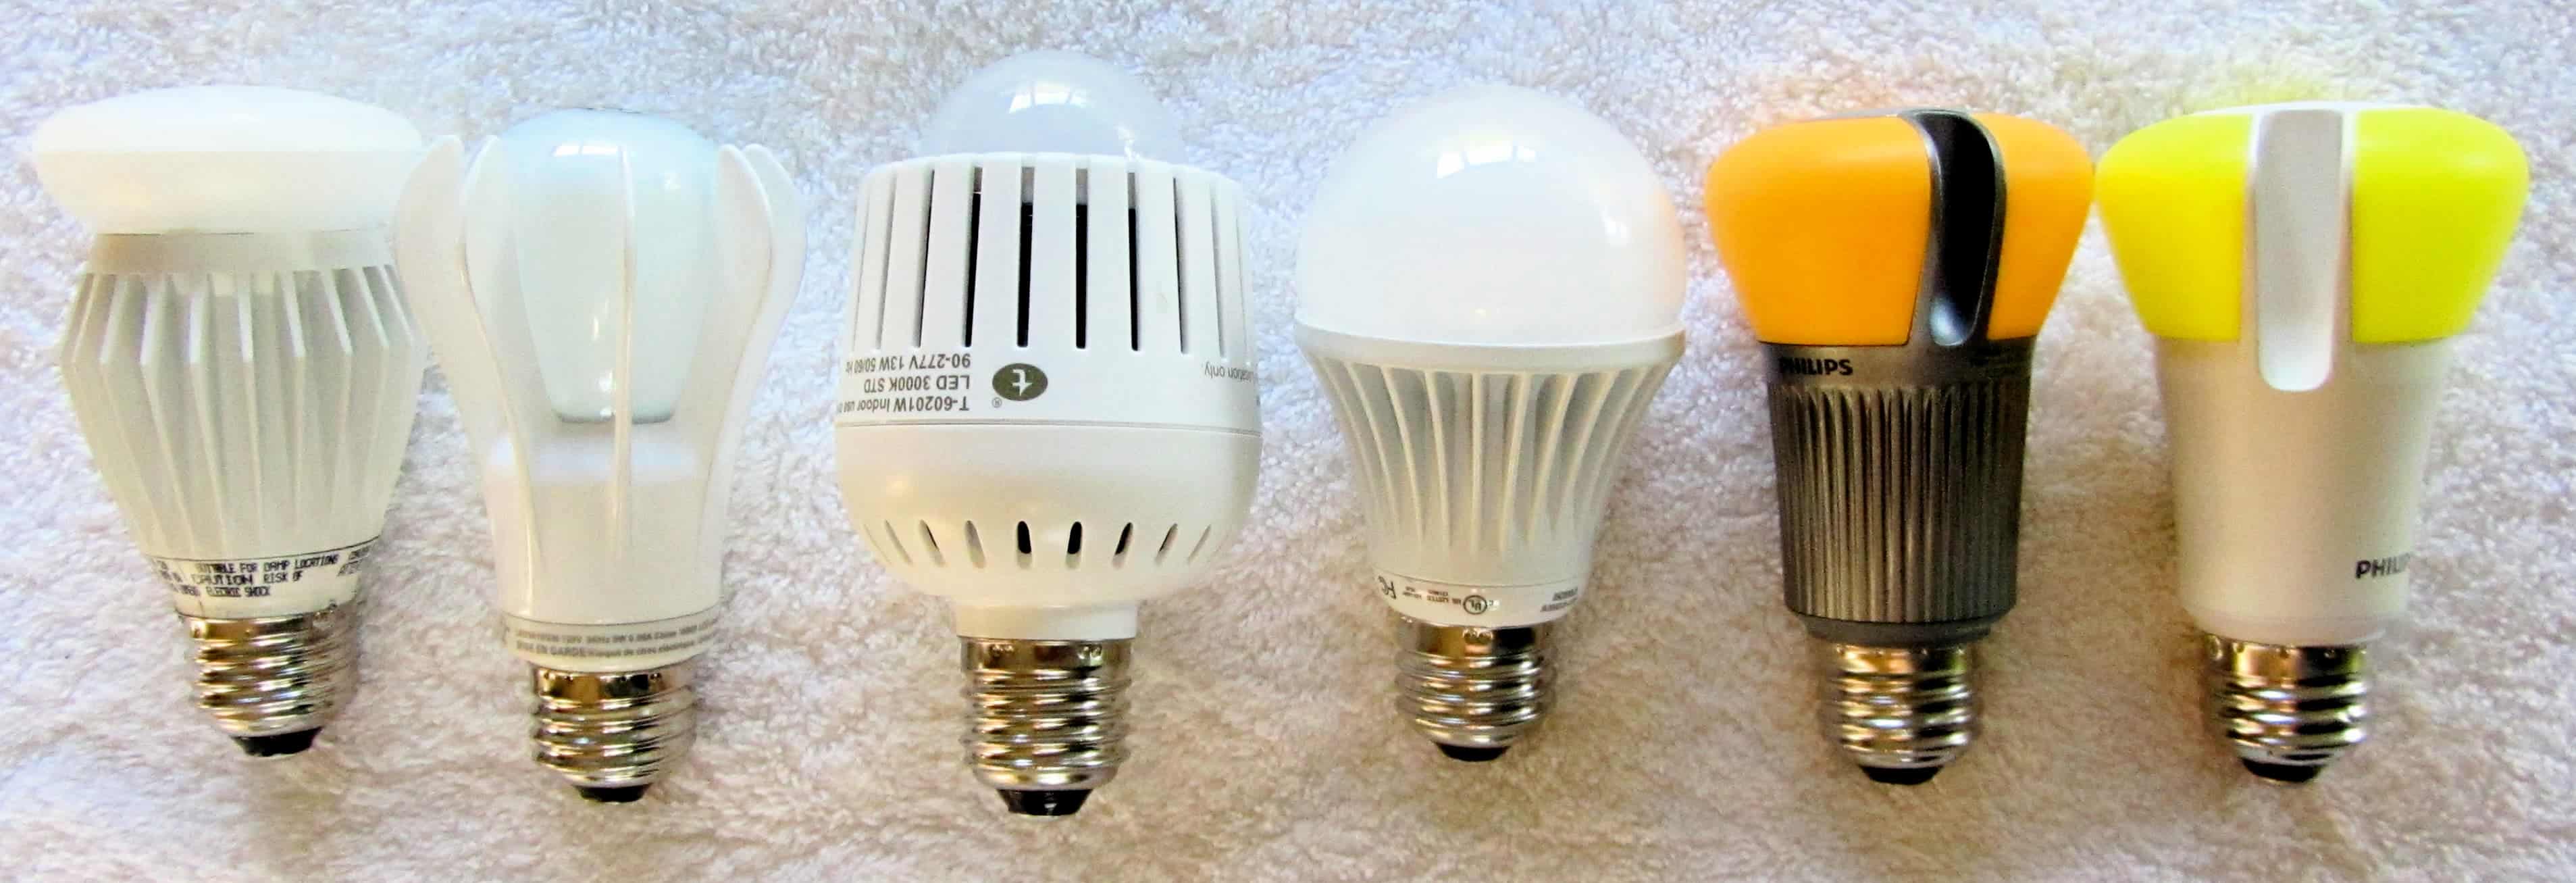 Some of the LED lightbulbs available to the consumer as screw-in replacements for standard incandescent bulbs. Photo by Geoffrey A. Landis.